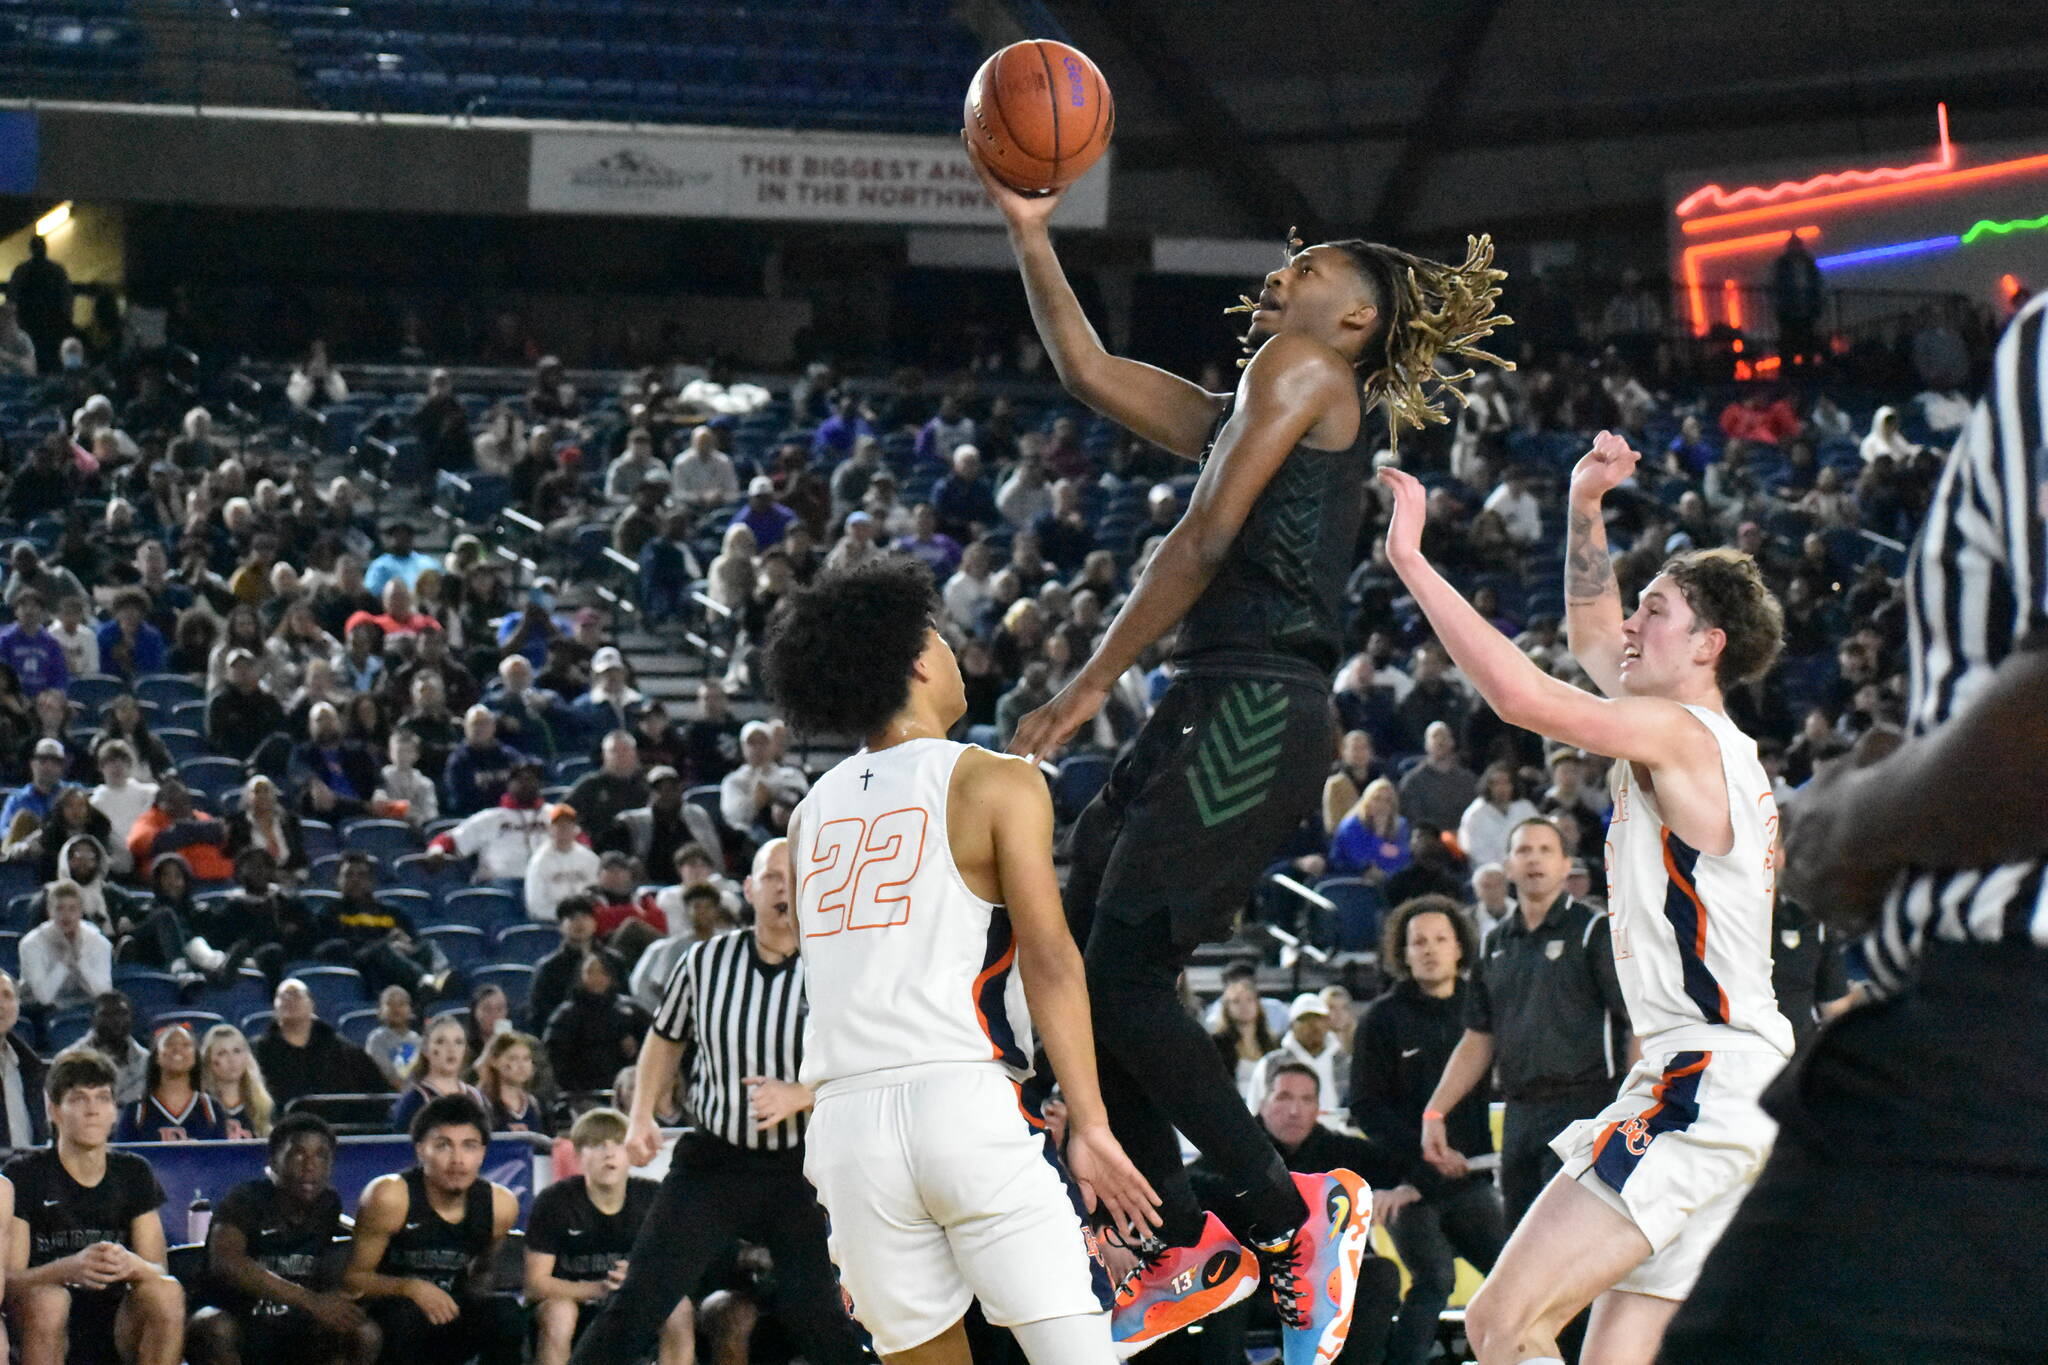 Auburn senior Lateibreon Chandler goes up for a layup inside the Tacoma Dome against Eastside Catholic. Ben Ray / The Reporter